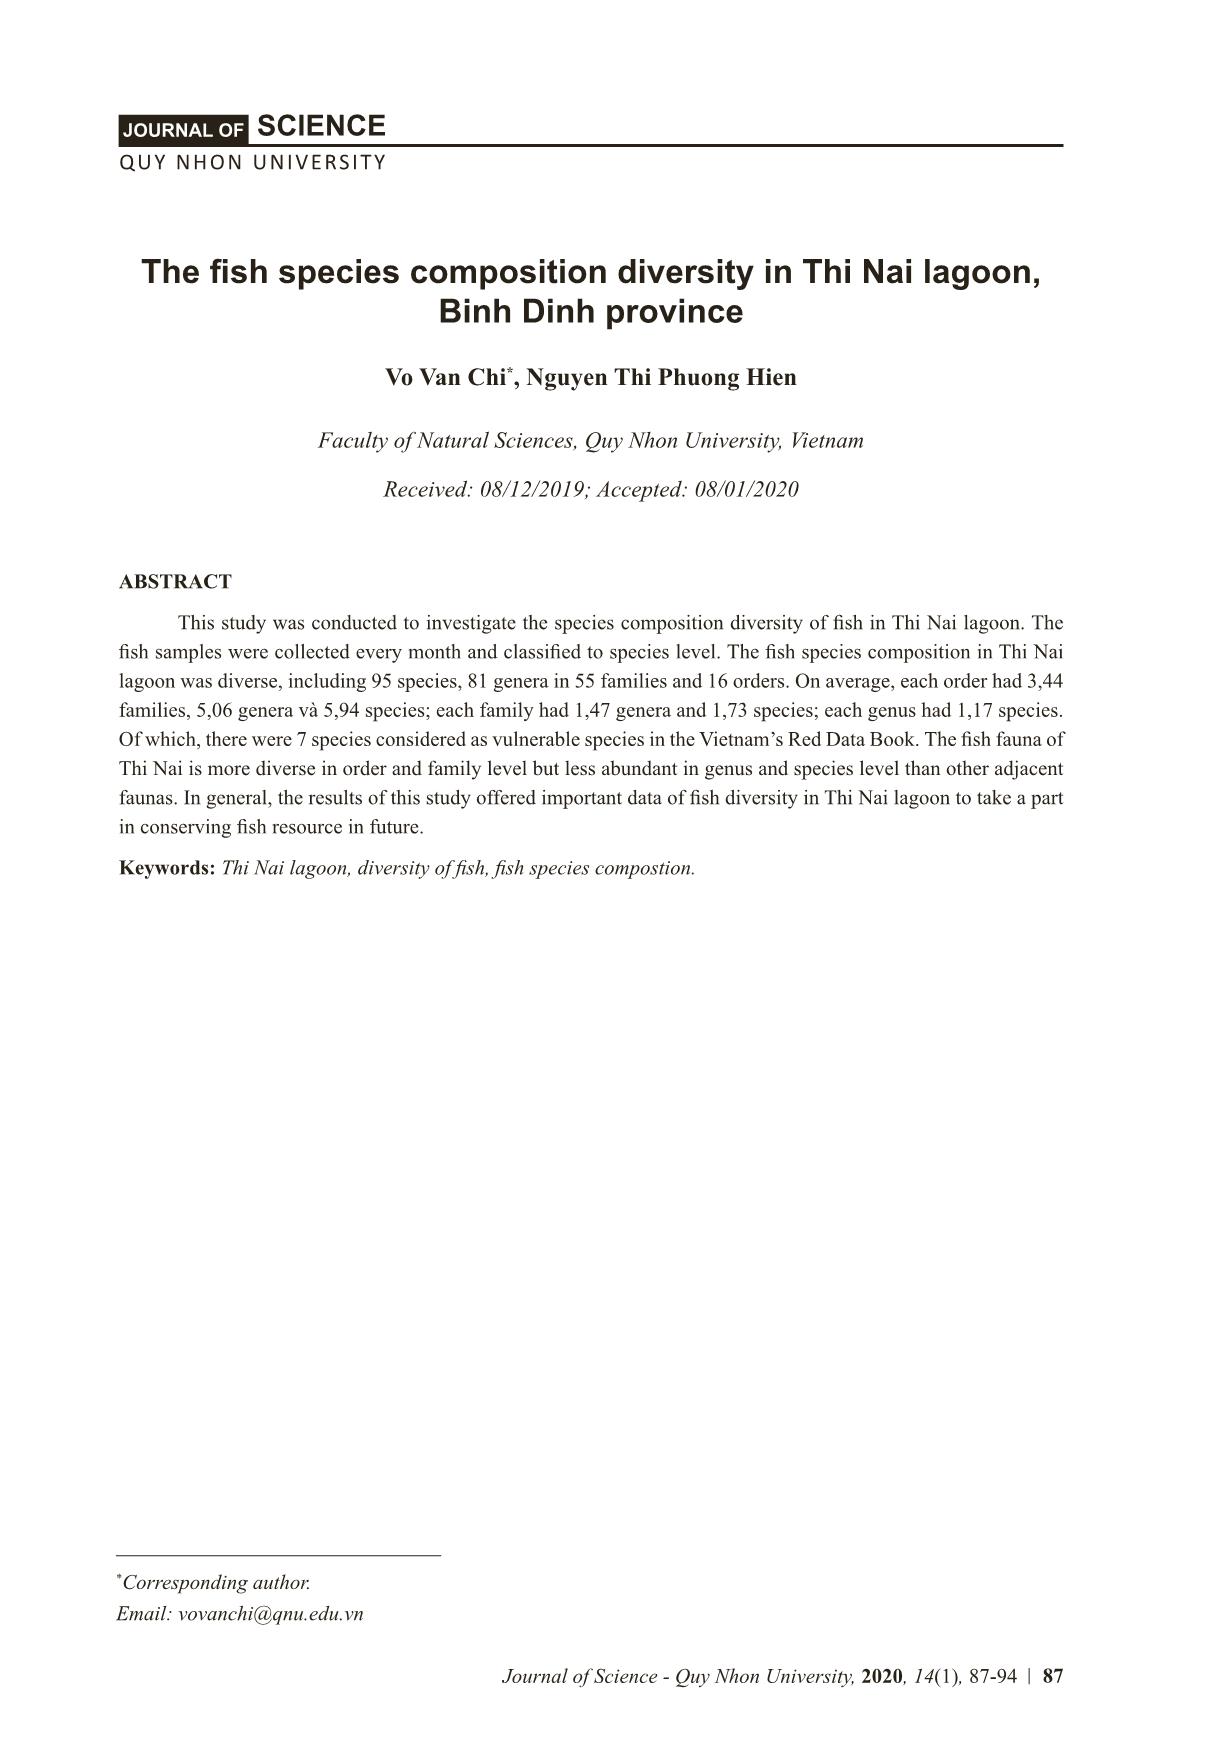 The fish species composition diversity in Thi Nai lagoon, Binh Dinh province trang 1